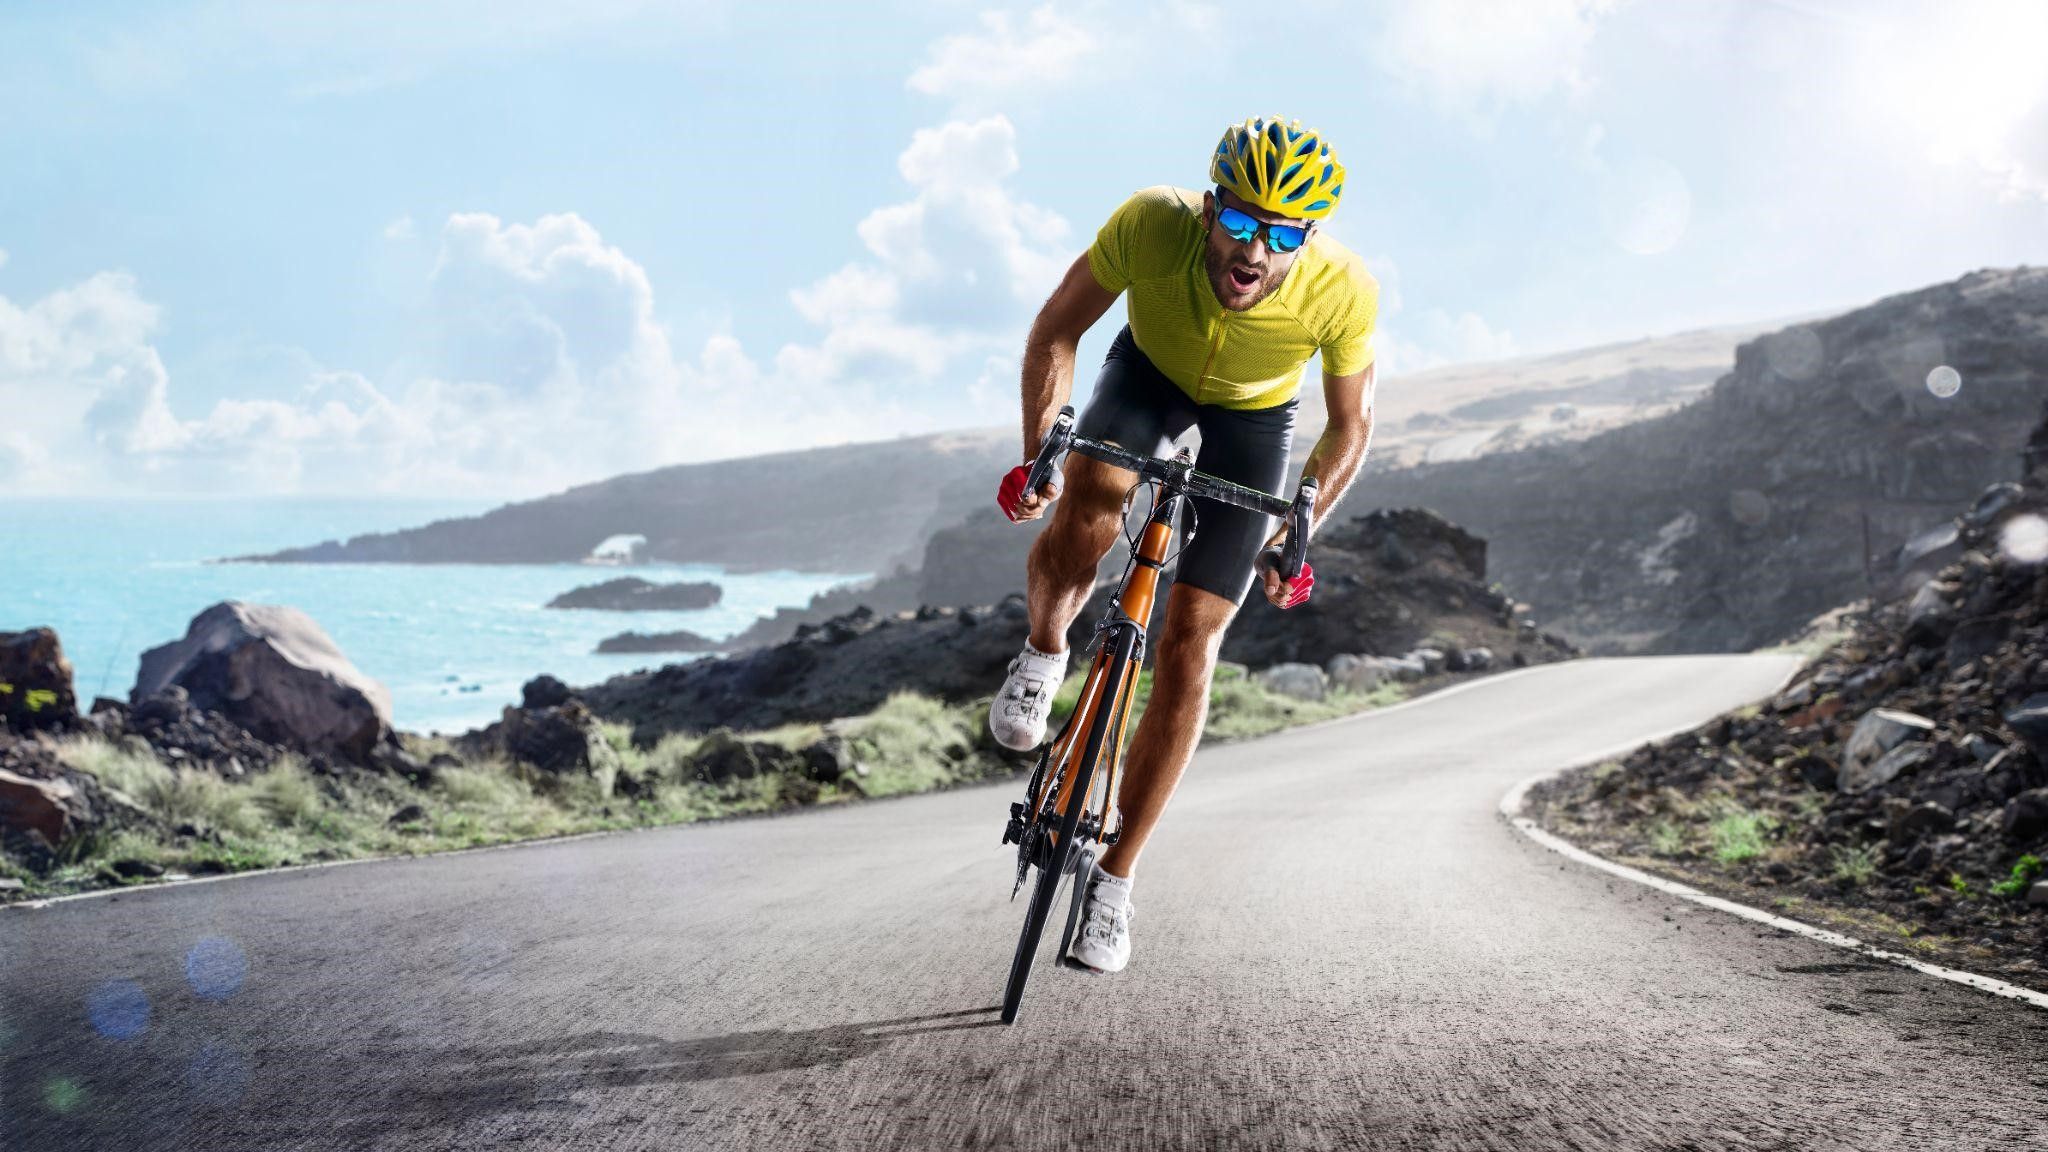 From Trainer To Terrain - Our Top Tips To Be Ready For Spring Riding